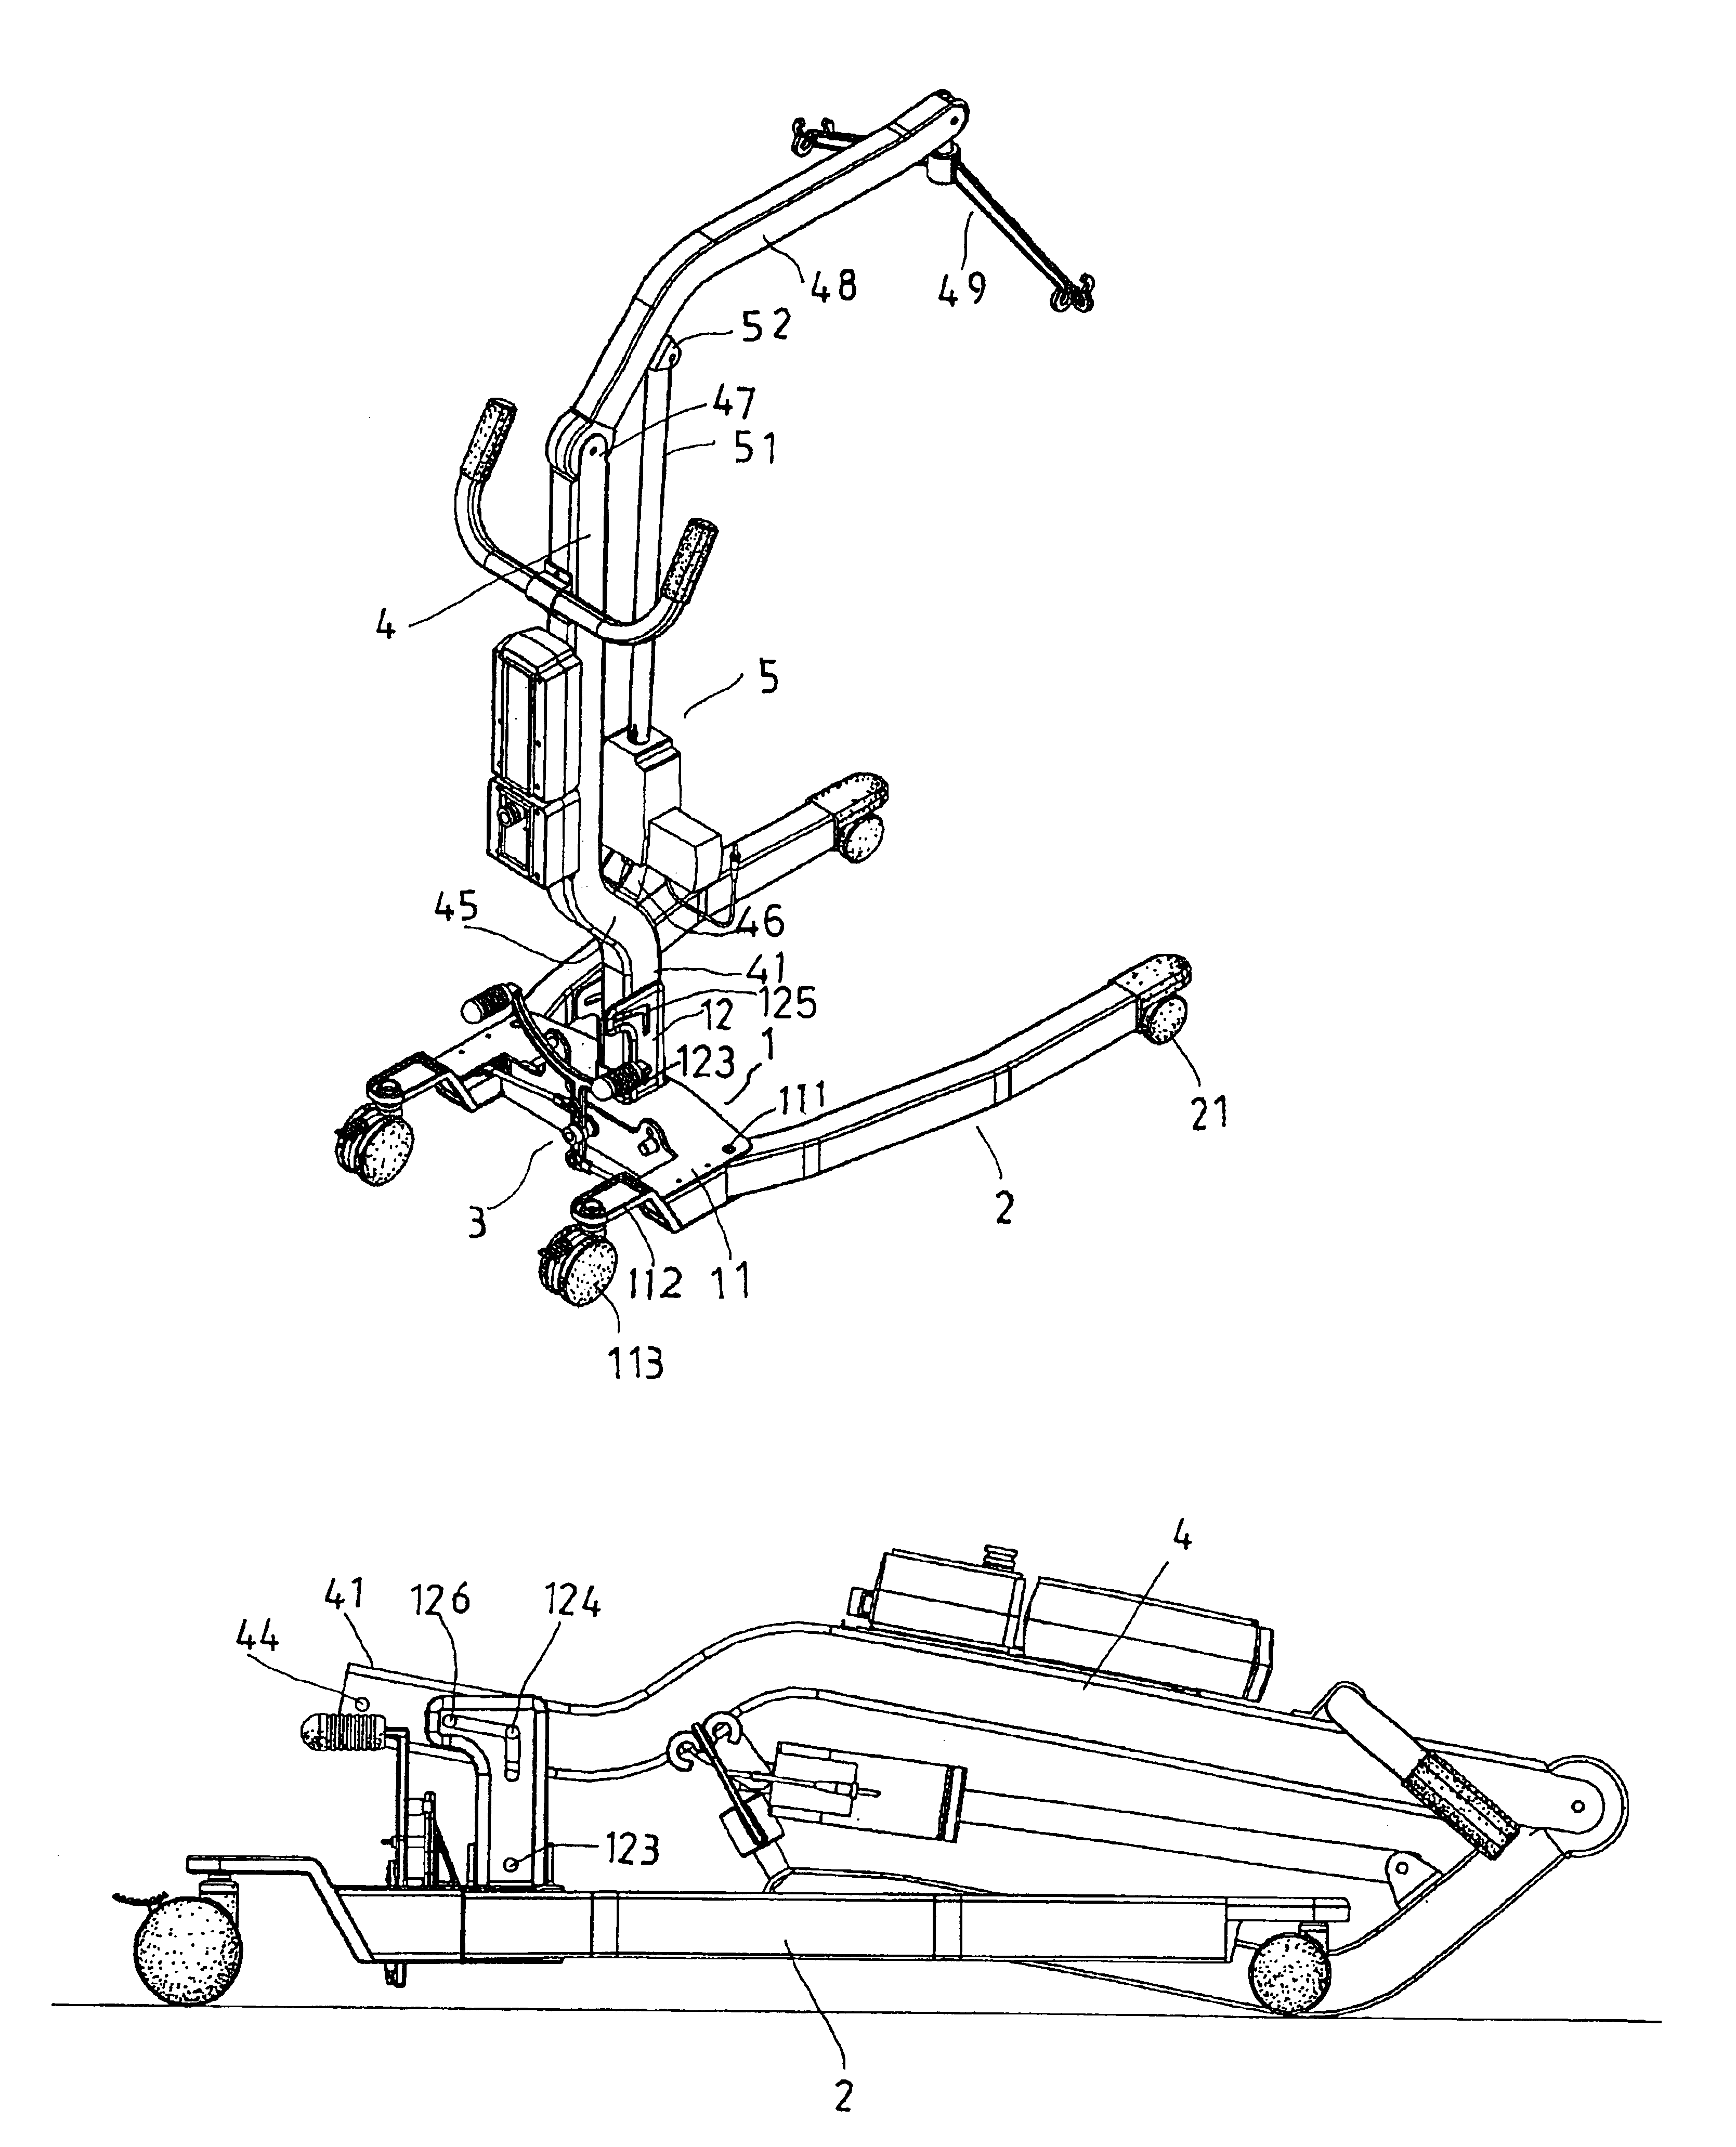 Foldable lift and transfer apparatus for patient